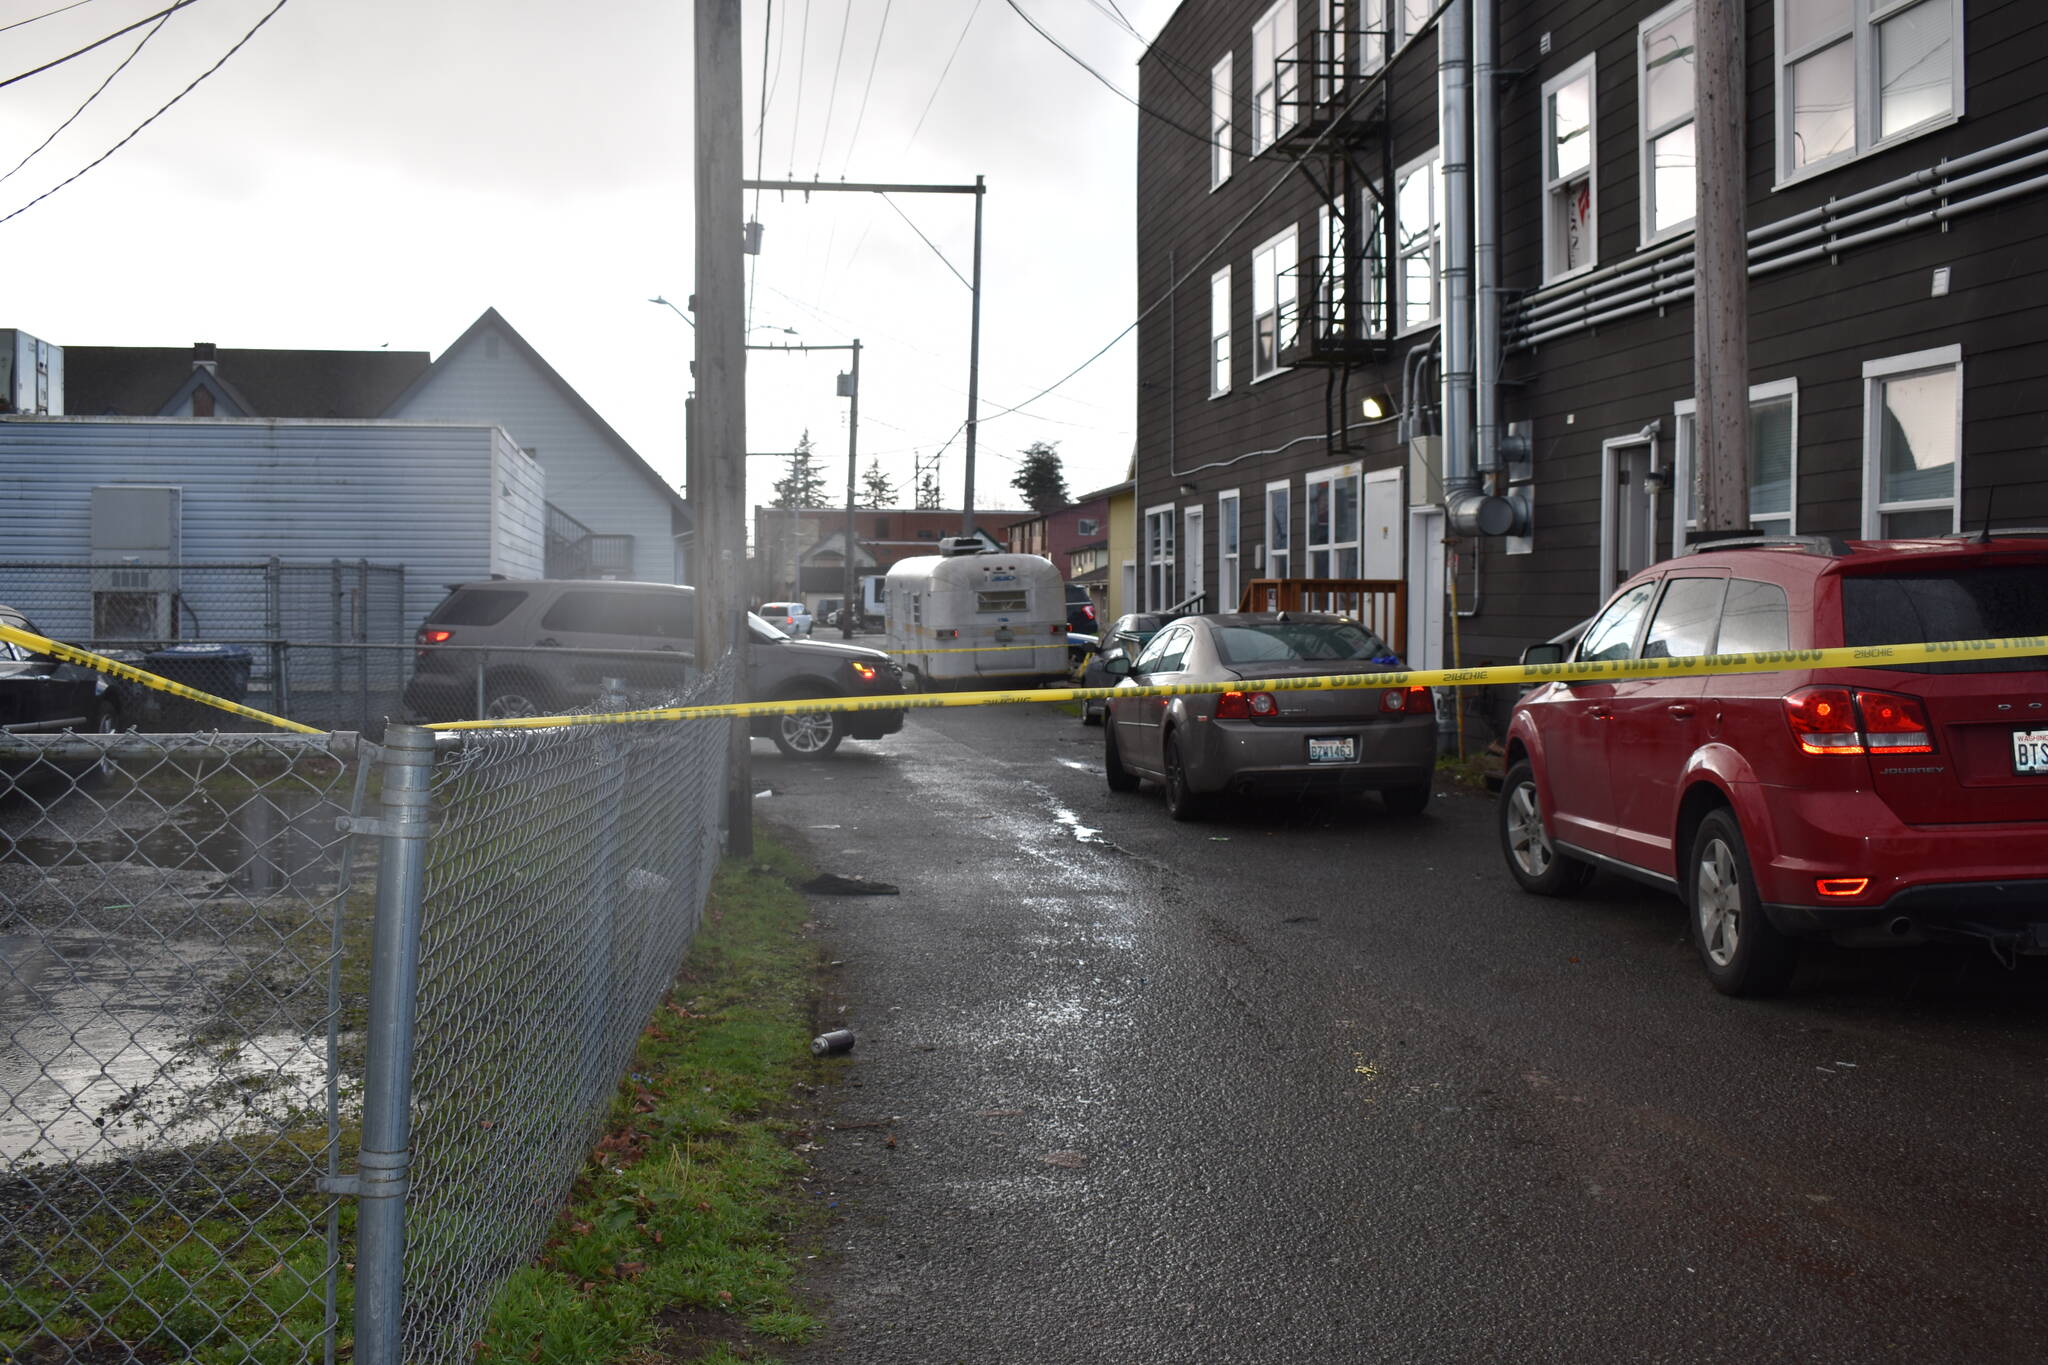 Aberdeen Police tape was affixed to street poles on Wednesday outside of the alleyway behind the apartment building at 213 N. F St., in Aberdeen, which was the scene of a shooting. Aberdeen Police Detective Sgt. Dave Cox said the Aberdeen High School, which was on a modified lockdown, was because because of protocol, given where the shooting occurred. (Matthew N. Wells | The Daily World)